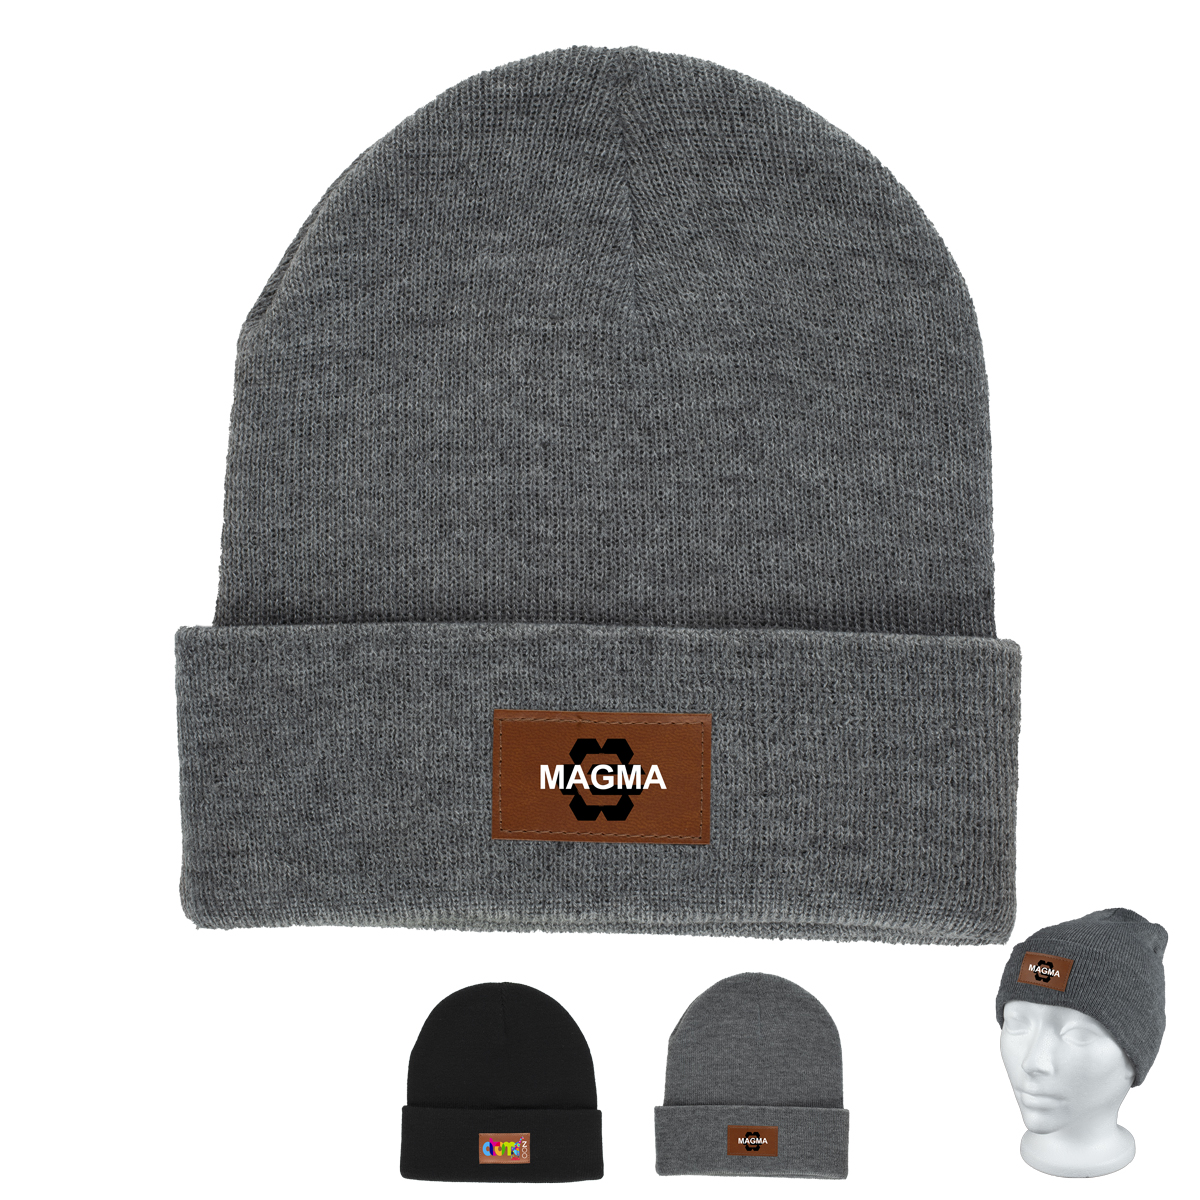 "TIBURON" Fashion and Performance Knit Beanie with Patch